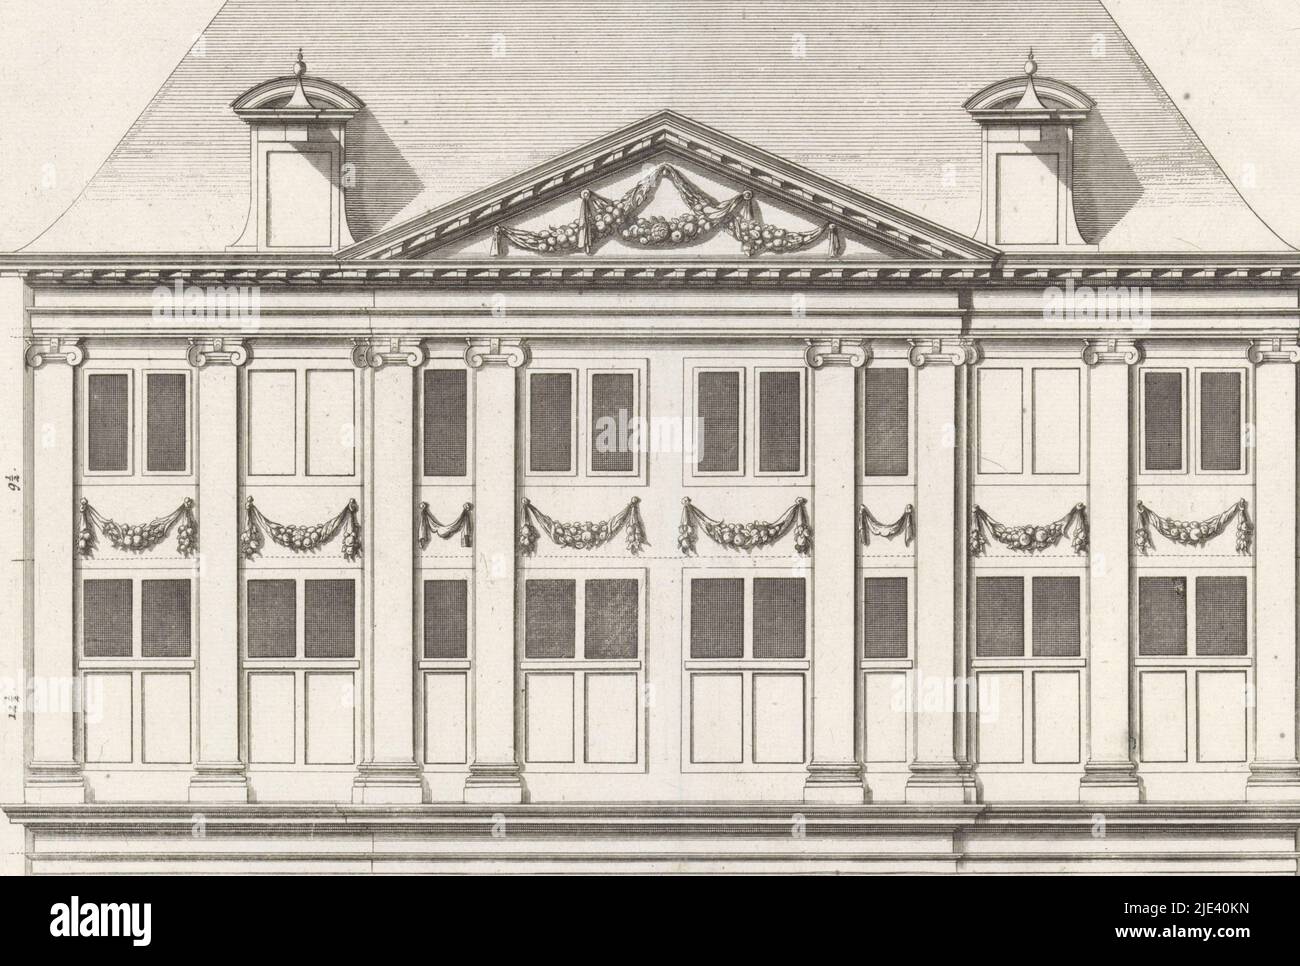 Frontage of a double house on the Oudezijds Voorburgwal in Amsterdam, Bastiaen Stopendael, after Philips Vinckboons (II), 1674, Frontage of the double house on the Oudezijds Voorburgwal 205-207 in Amsterdam. The house was designed by Philips Vingboons for Jan and Hendrik Schuyt in 1650., print maker: Bastiaen Stopendael, (mentioned on object), Philips Vinckboons (II), (mentioned on object), Amsterdam, 1674, paper, etching, engraving, h 373 mm × w 312 mm Stock Photo